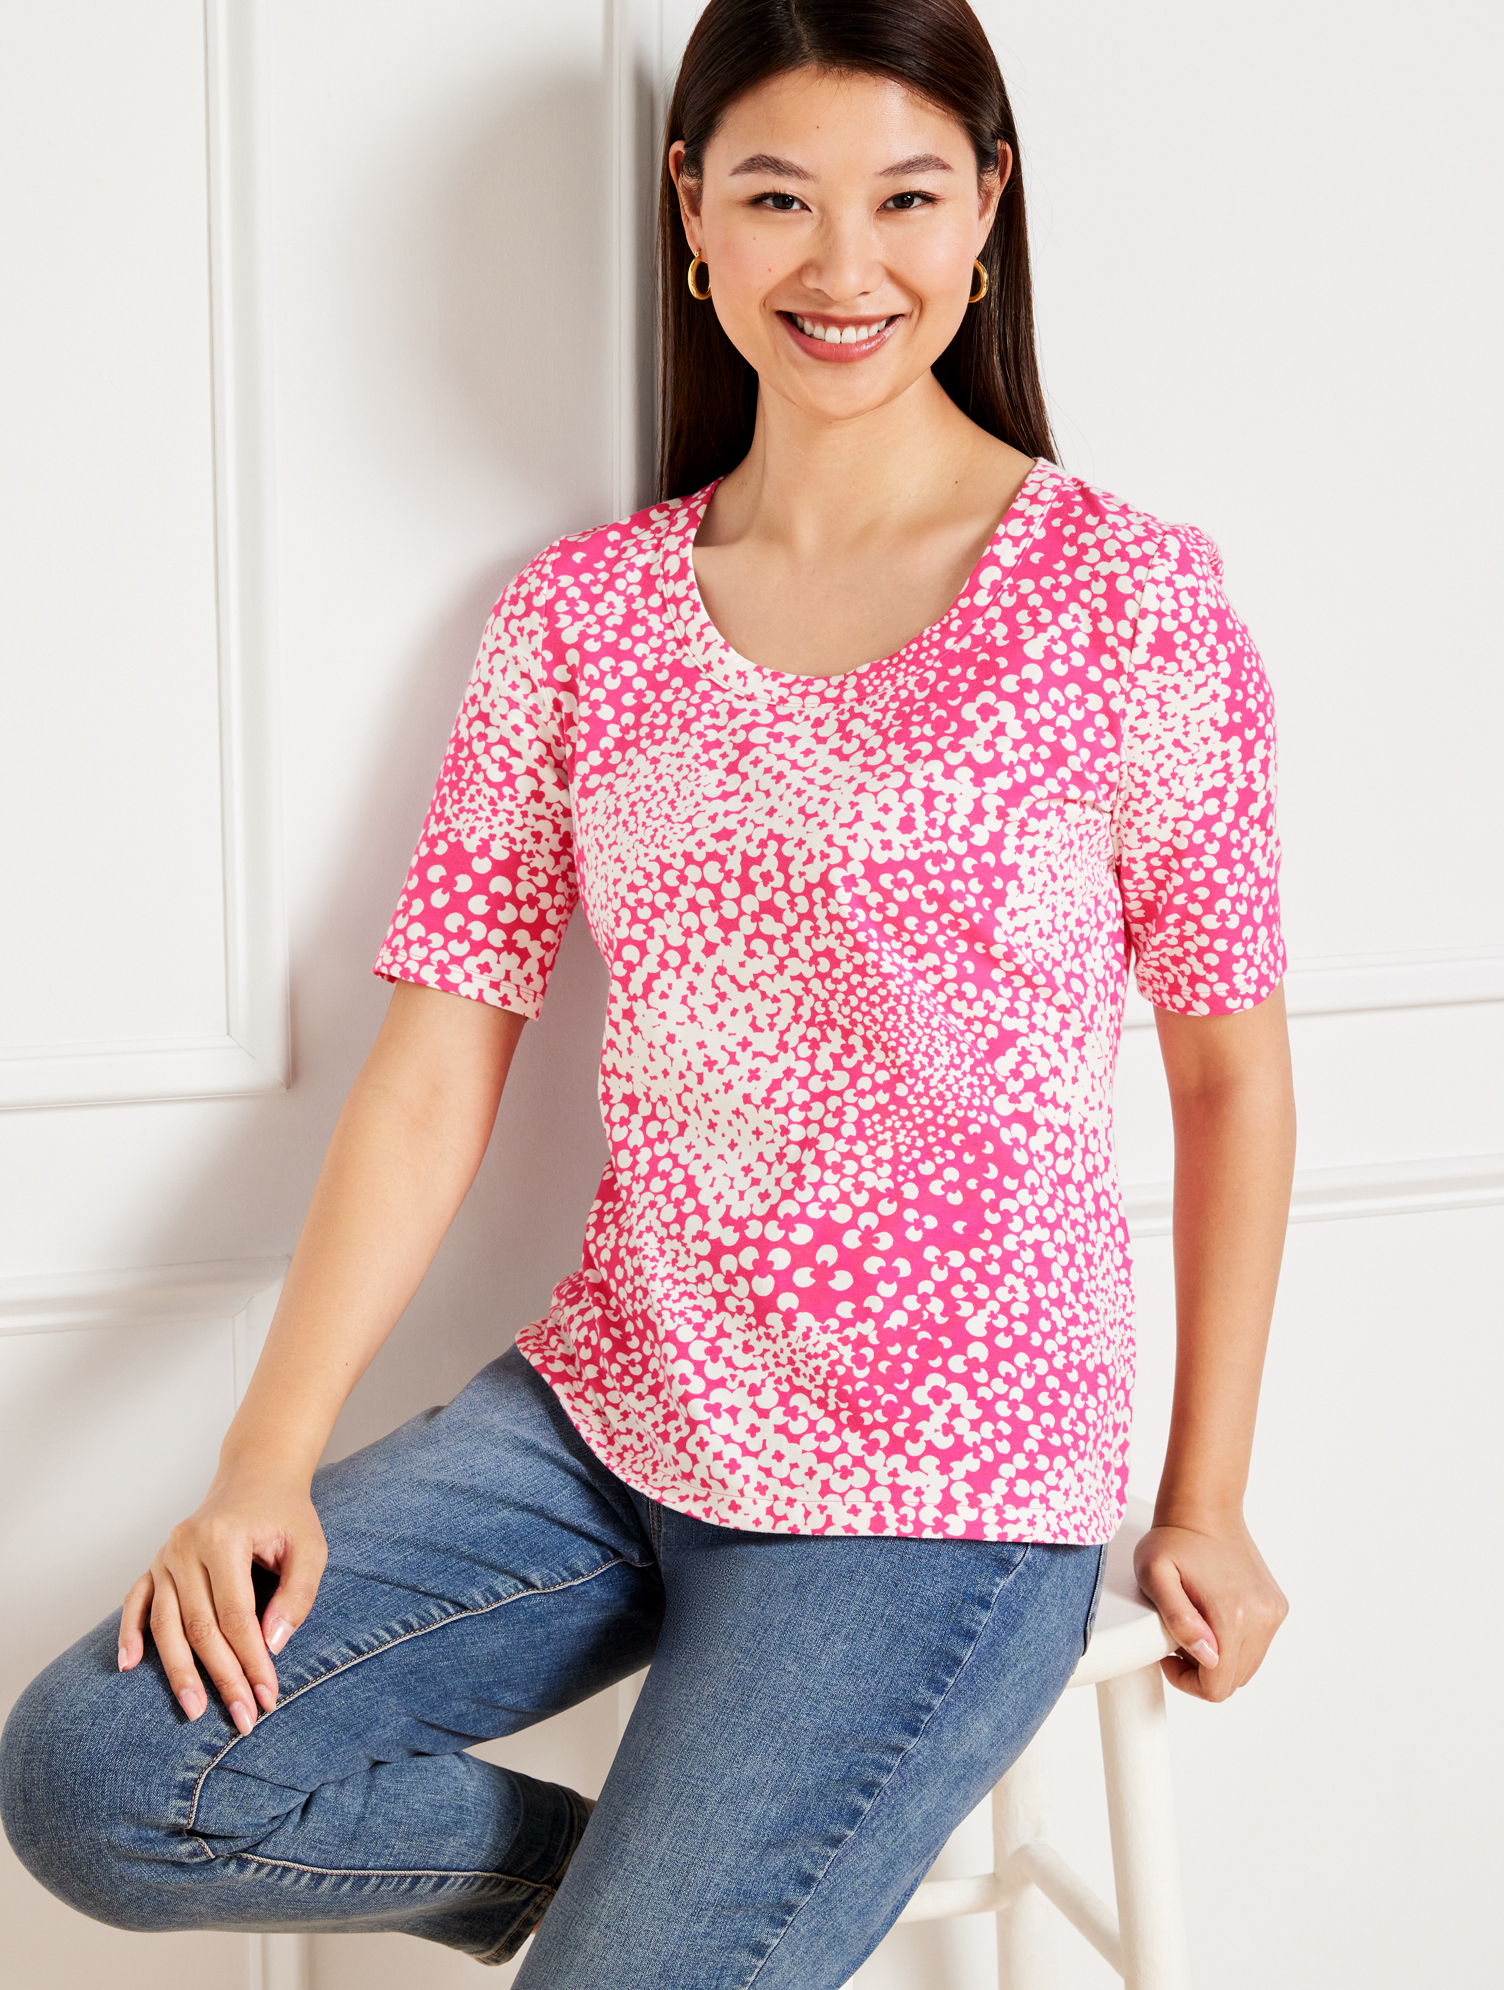 Talbots Petite - Scoop Neck T-shirt - Abstract Clovers - Pink Geranium/ivory - 2xs  In Pink Geranium,ivory